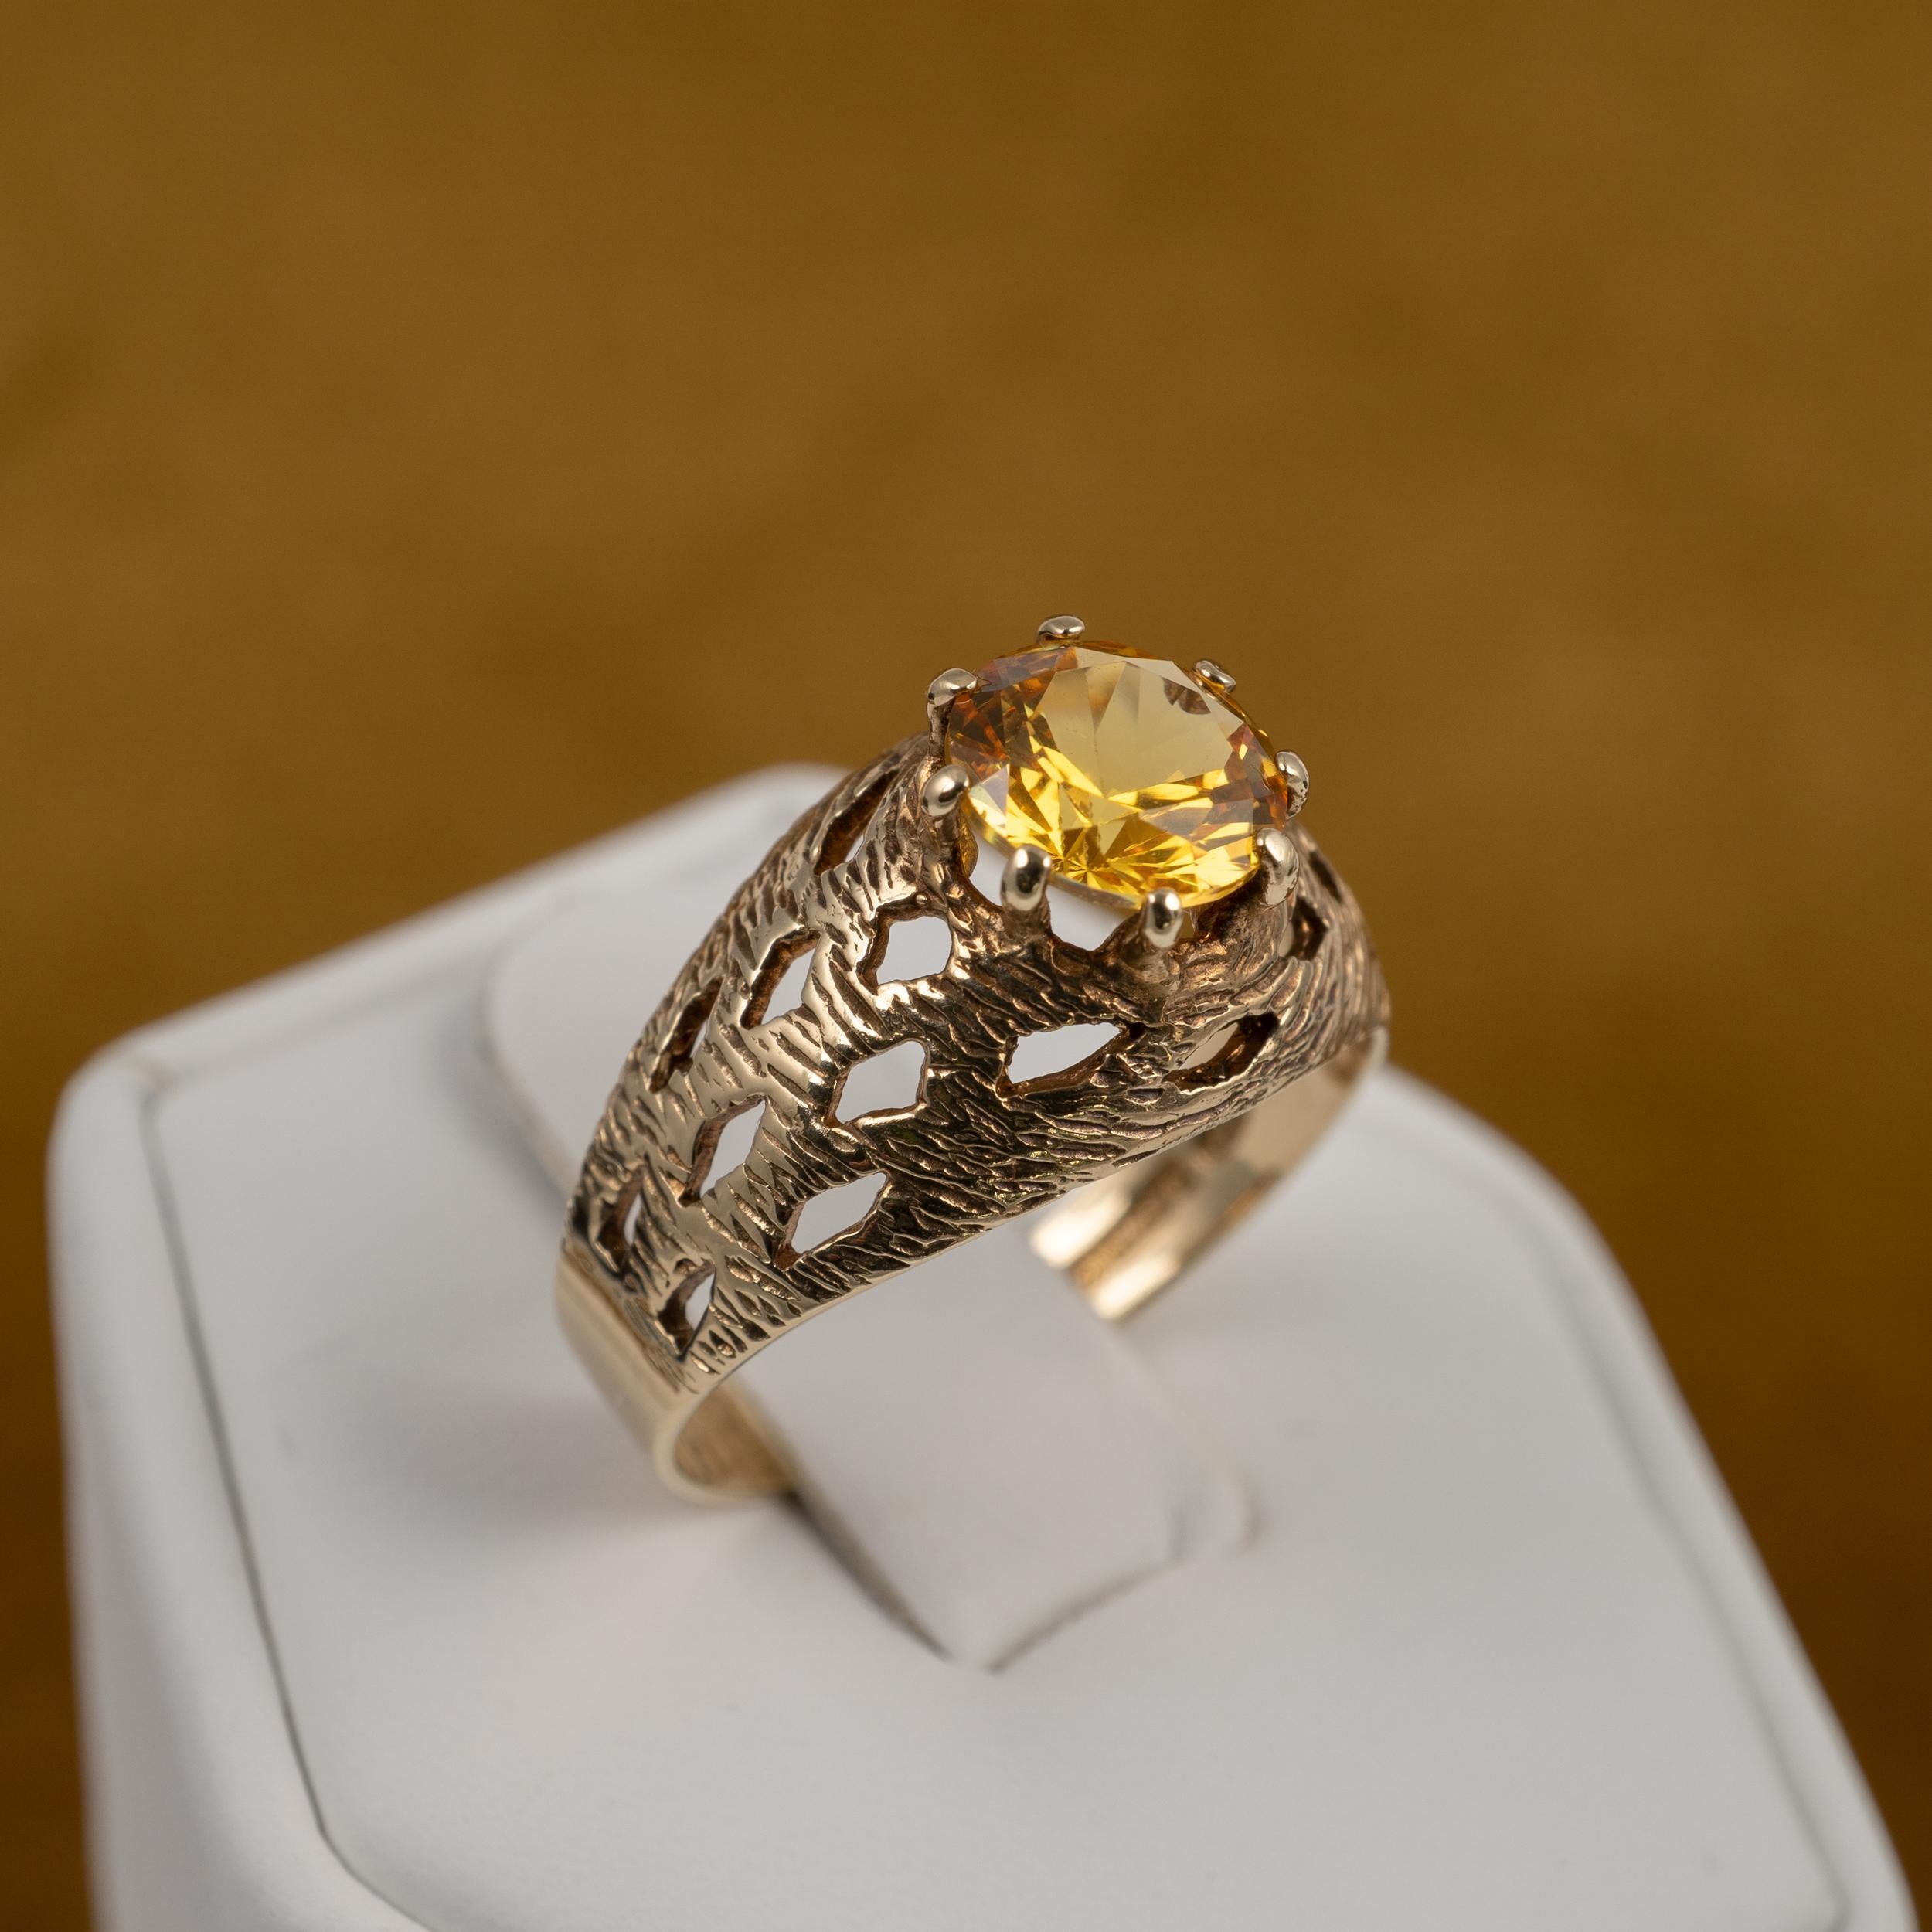 Round Cut Vintage 19780s Chunky Citrine Solitaire Ring 9 Karat Gold Hallmark Dated 1974 For Sale